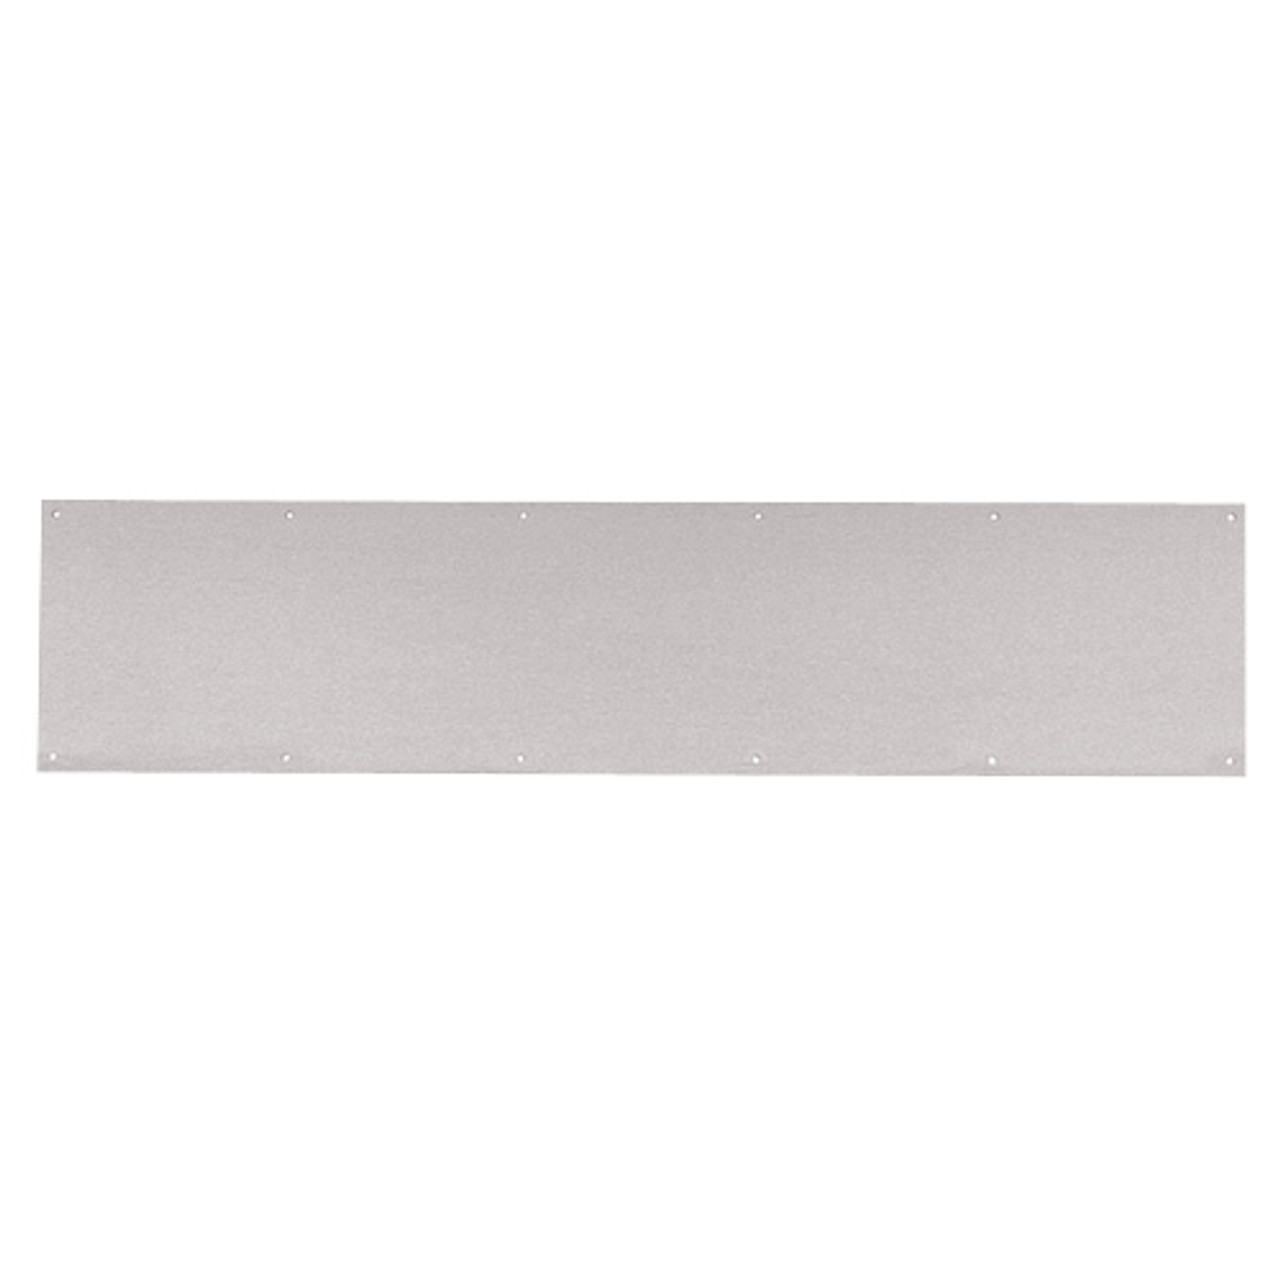 8400-US32D-14x34-B-CS Ives 8400 Series Protection Plate in Satin Stainless Steel